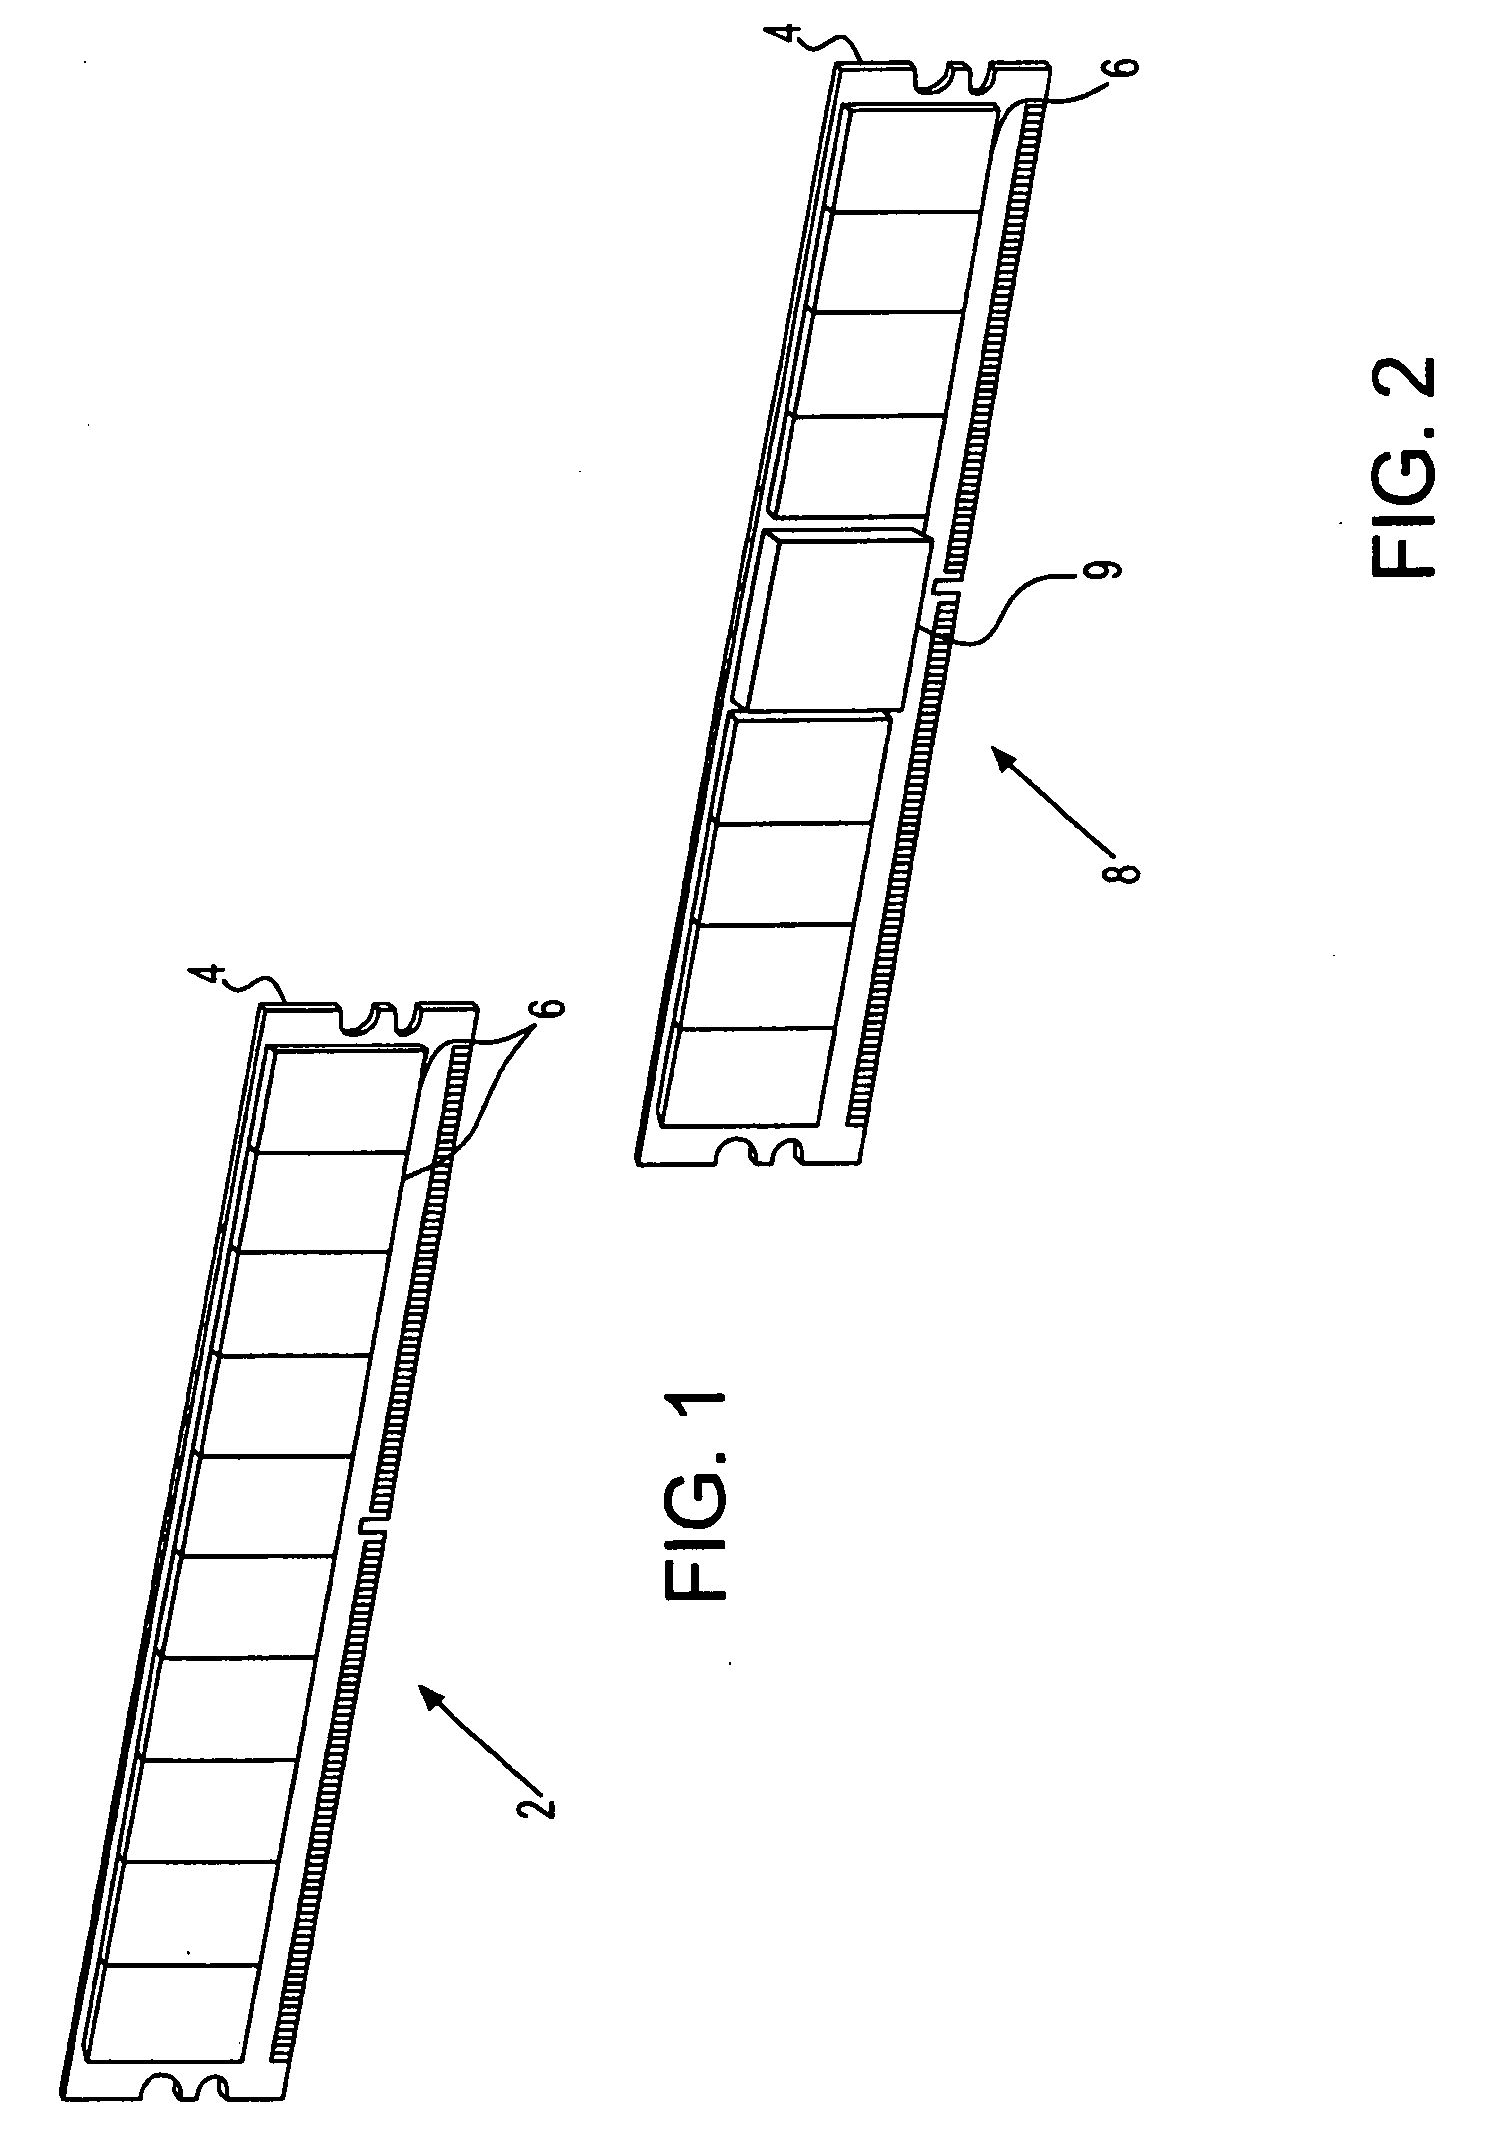 Apparatus and method of direct water cooling several parallel circuit cards each containing several chip packages